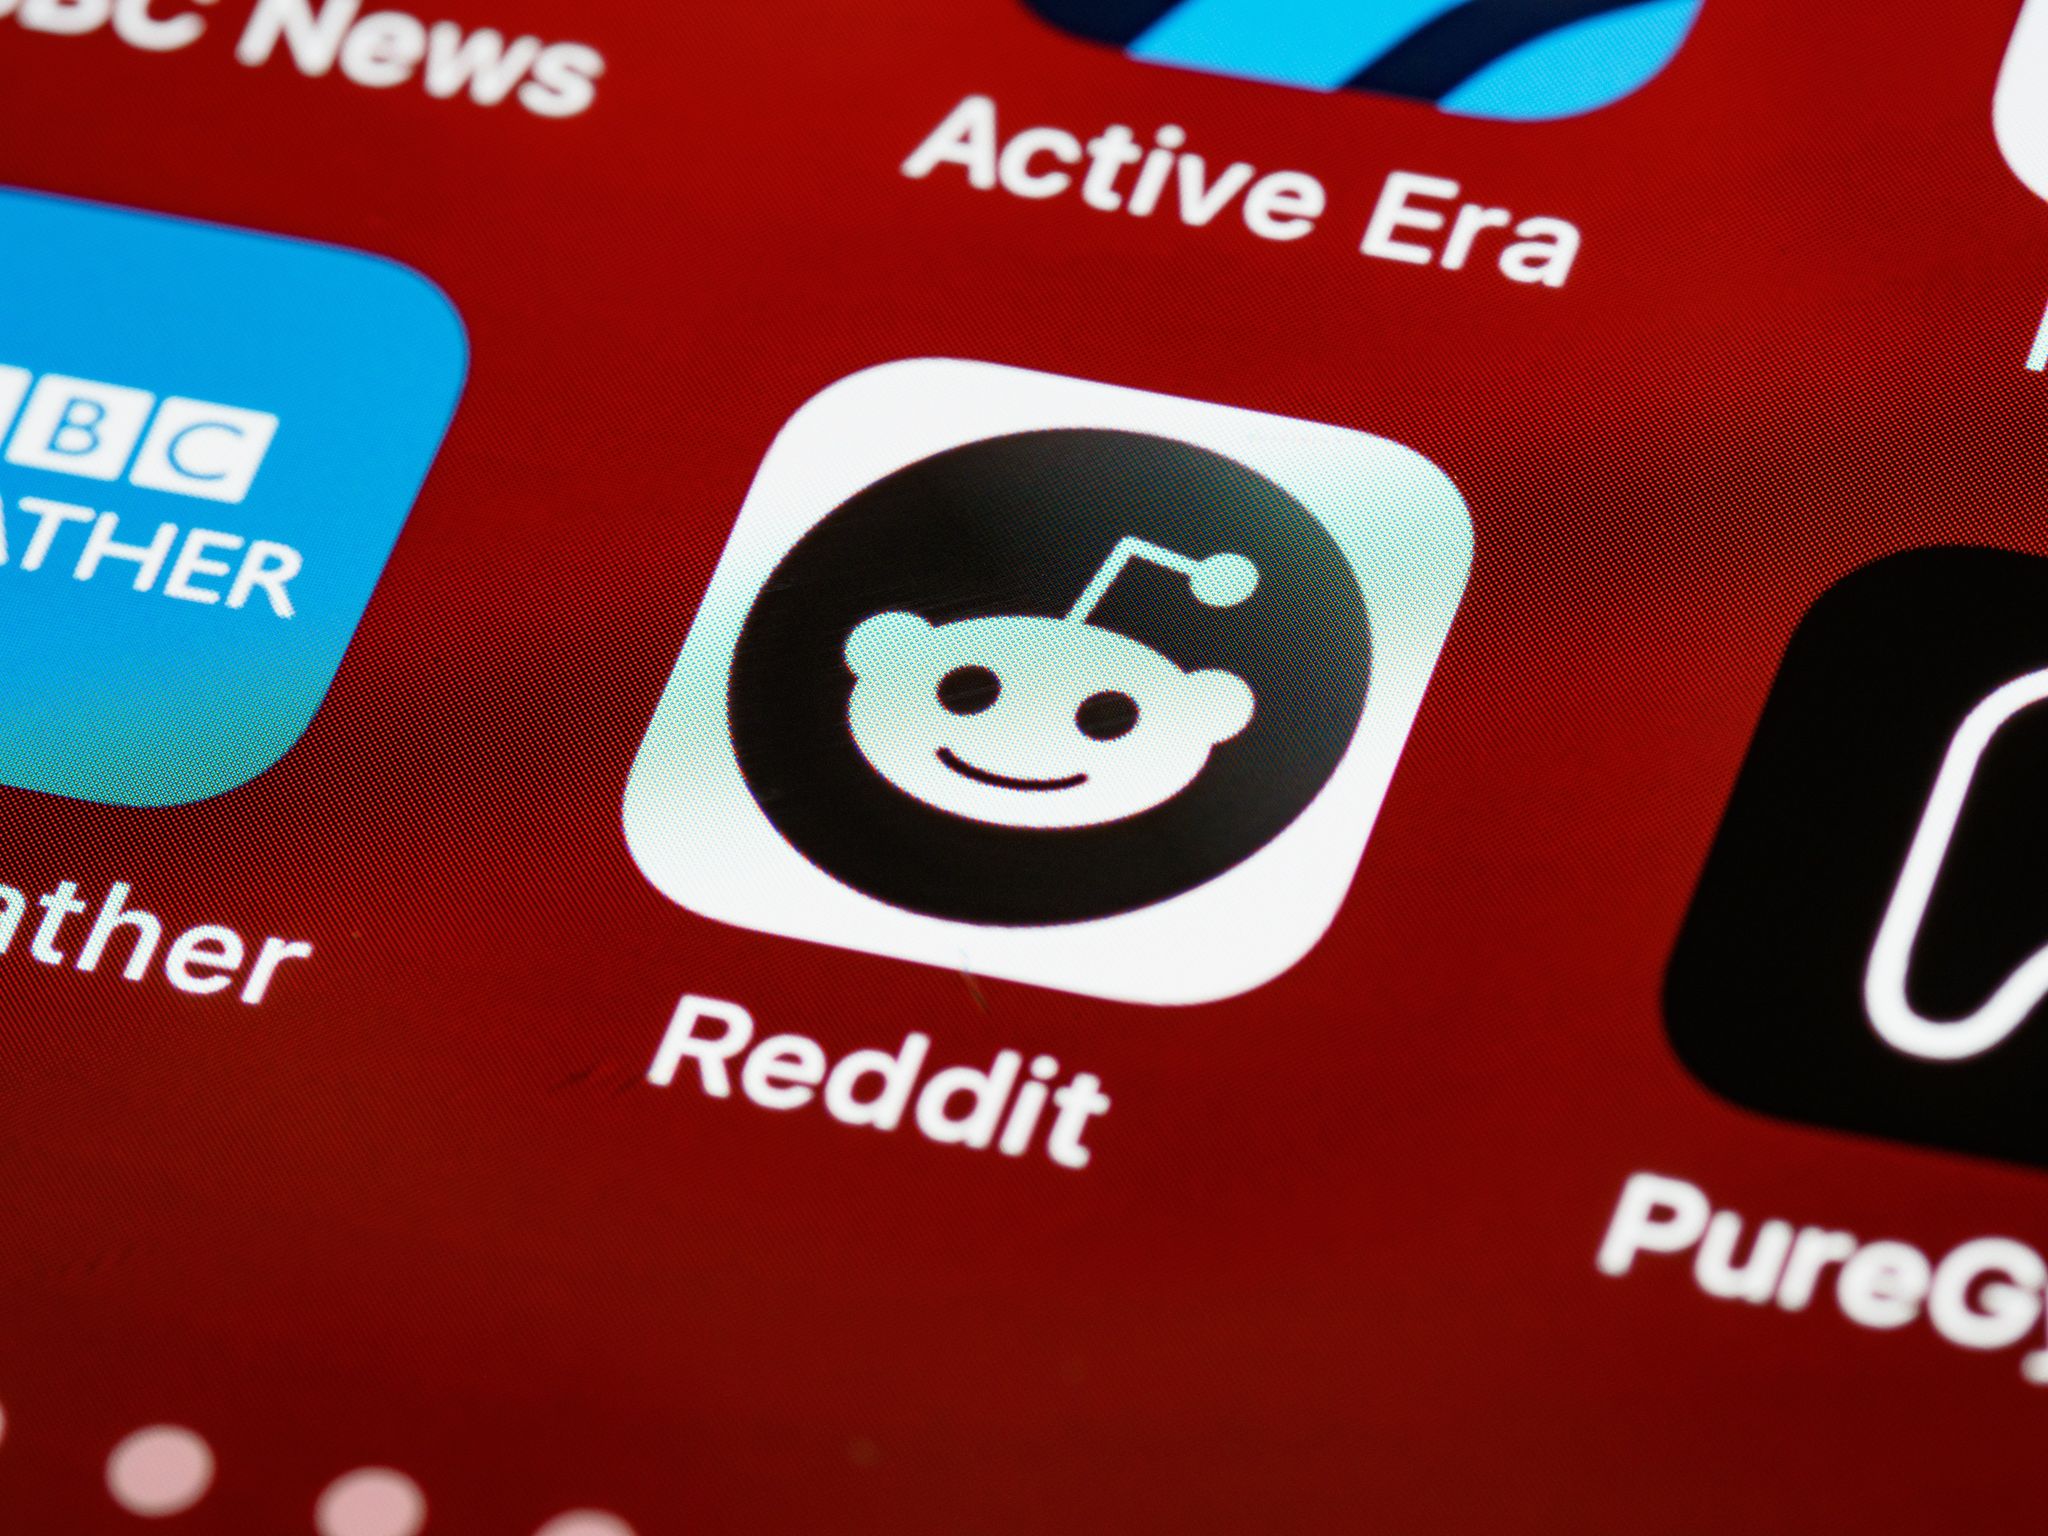 4 Content Marketing Tips To Use When Marketing On Reddit